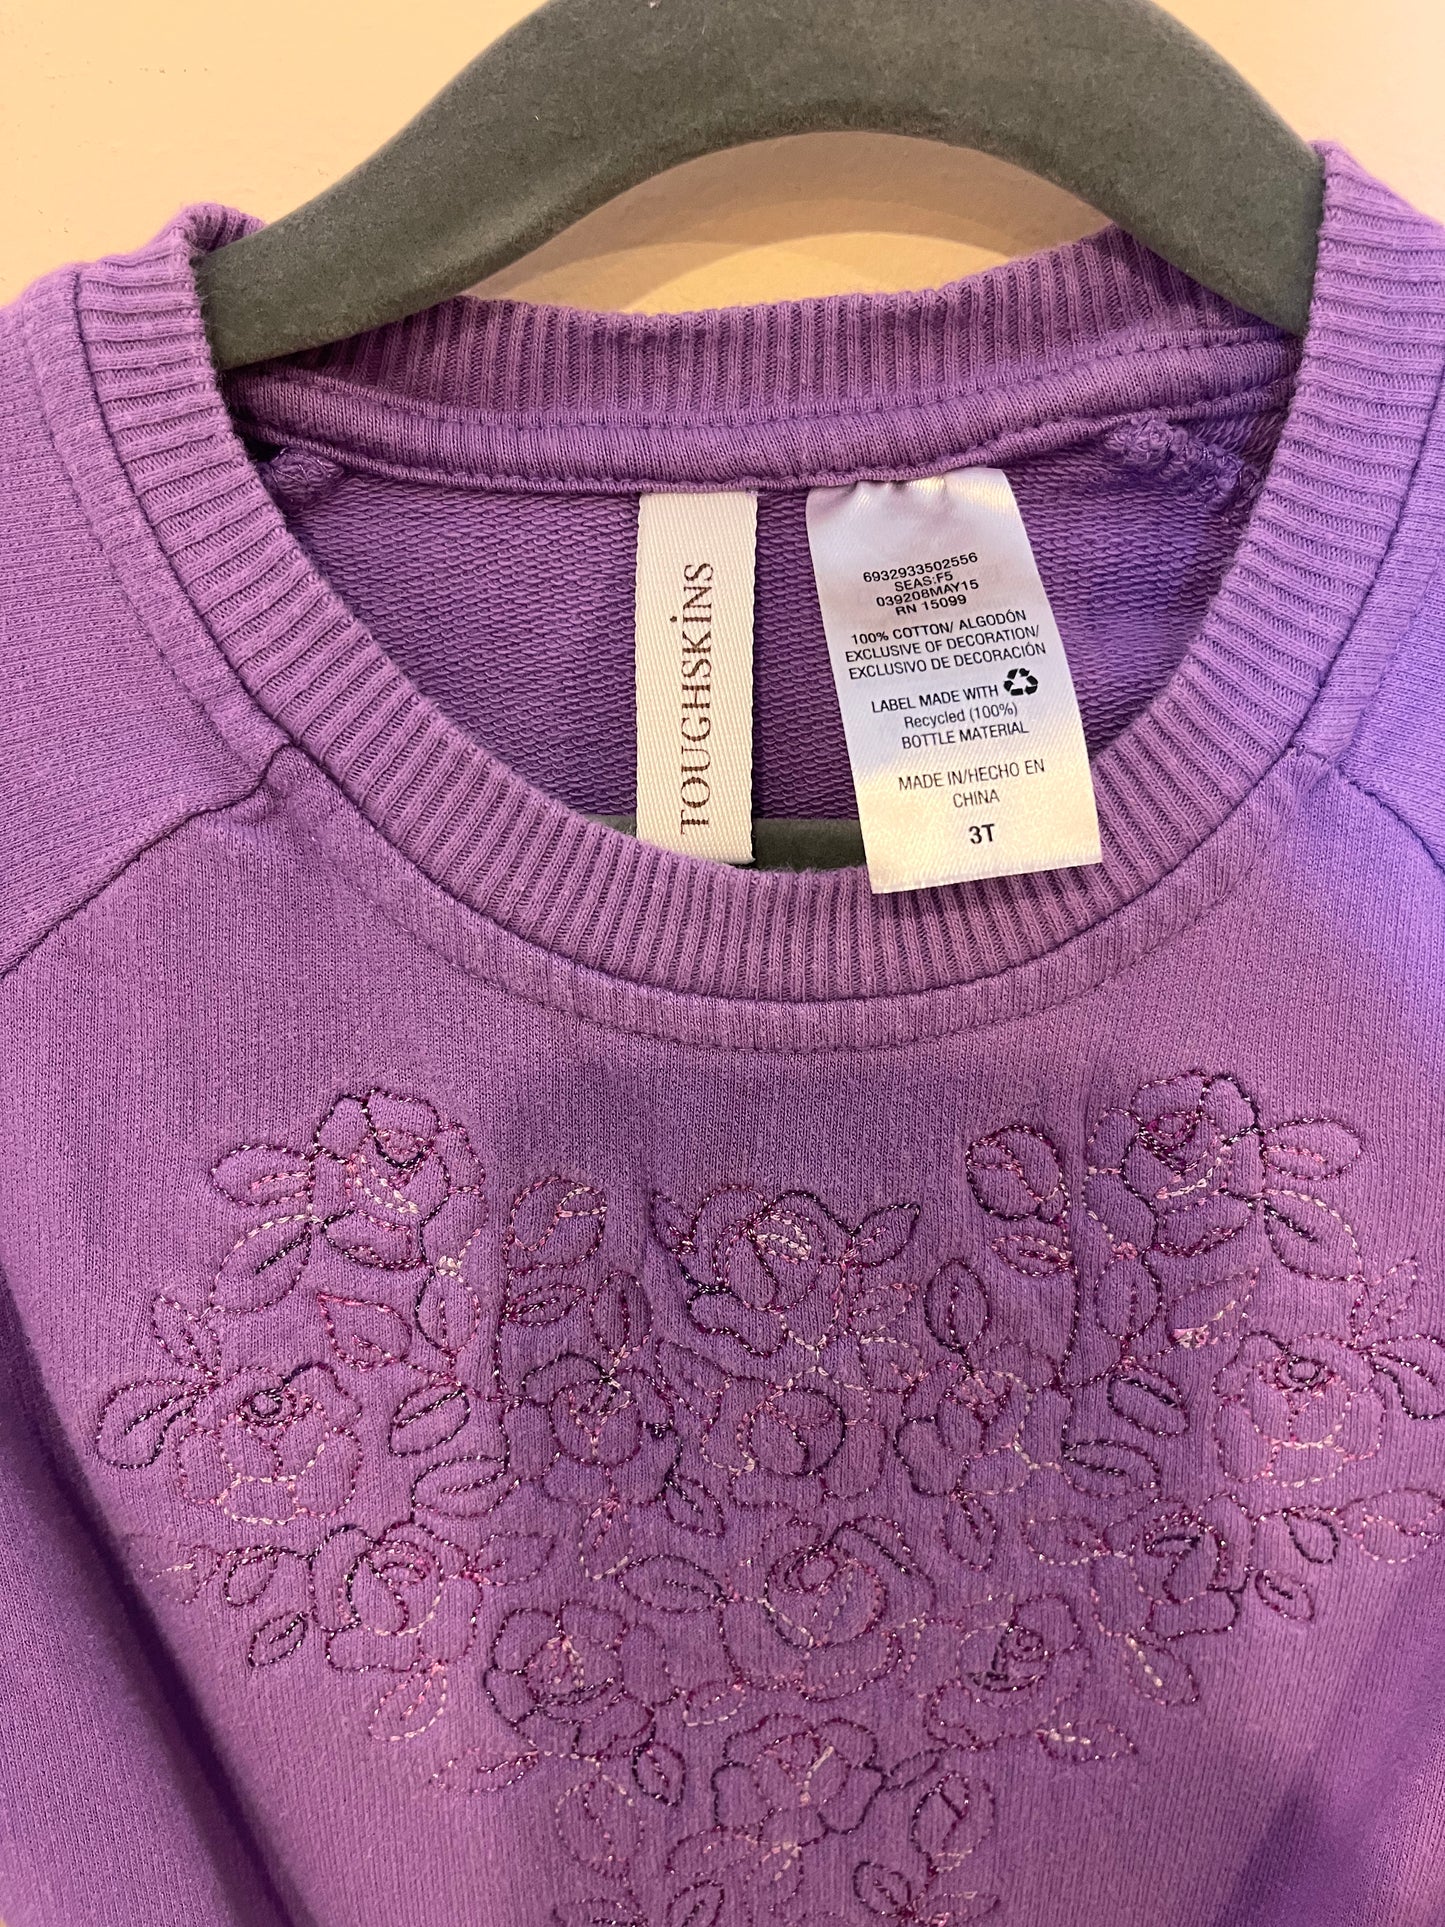 Toughskins Embroidered Floral Sparkle Sweater (3T)